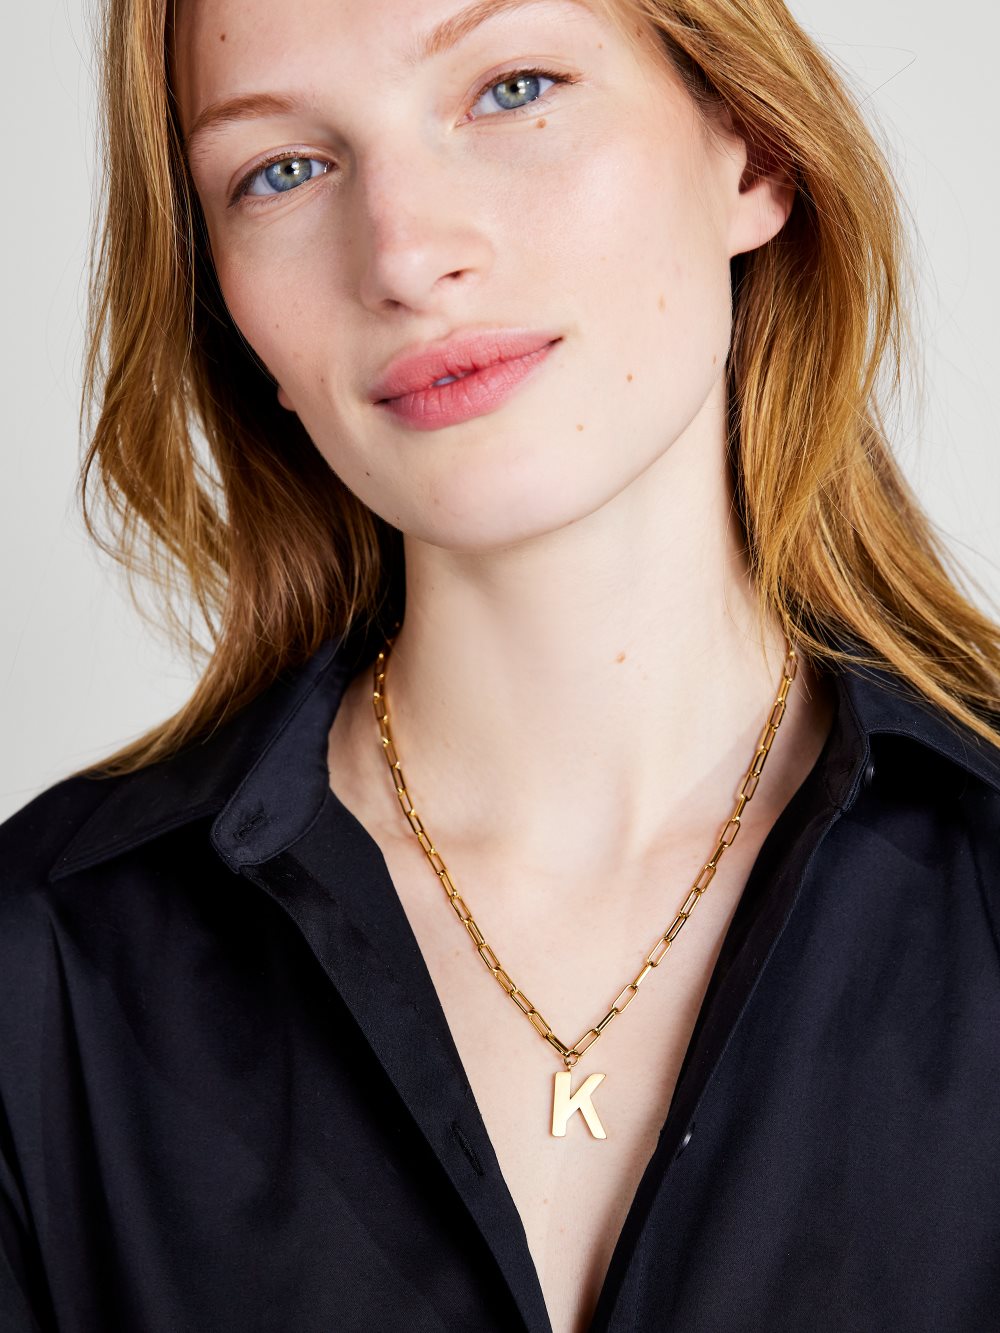 Women's gold. r initial this pendant | Kate Spade